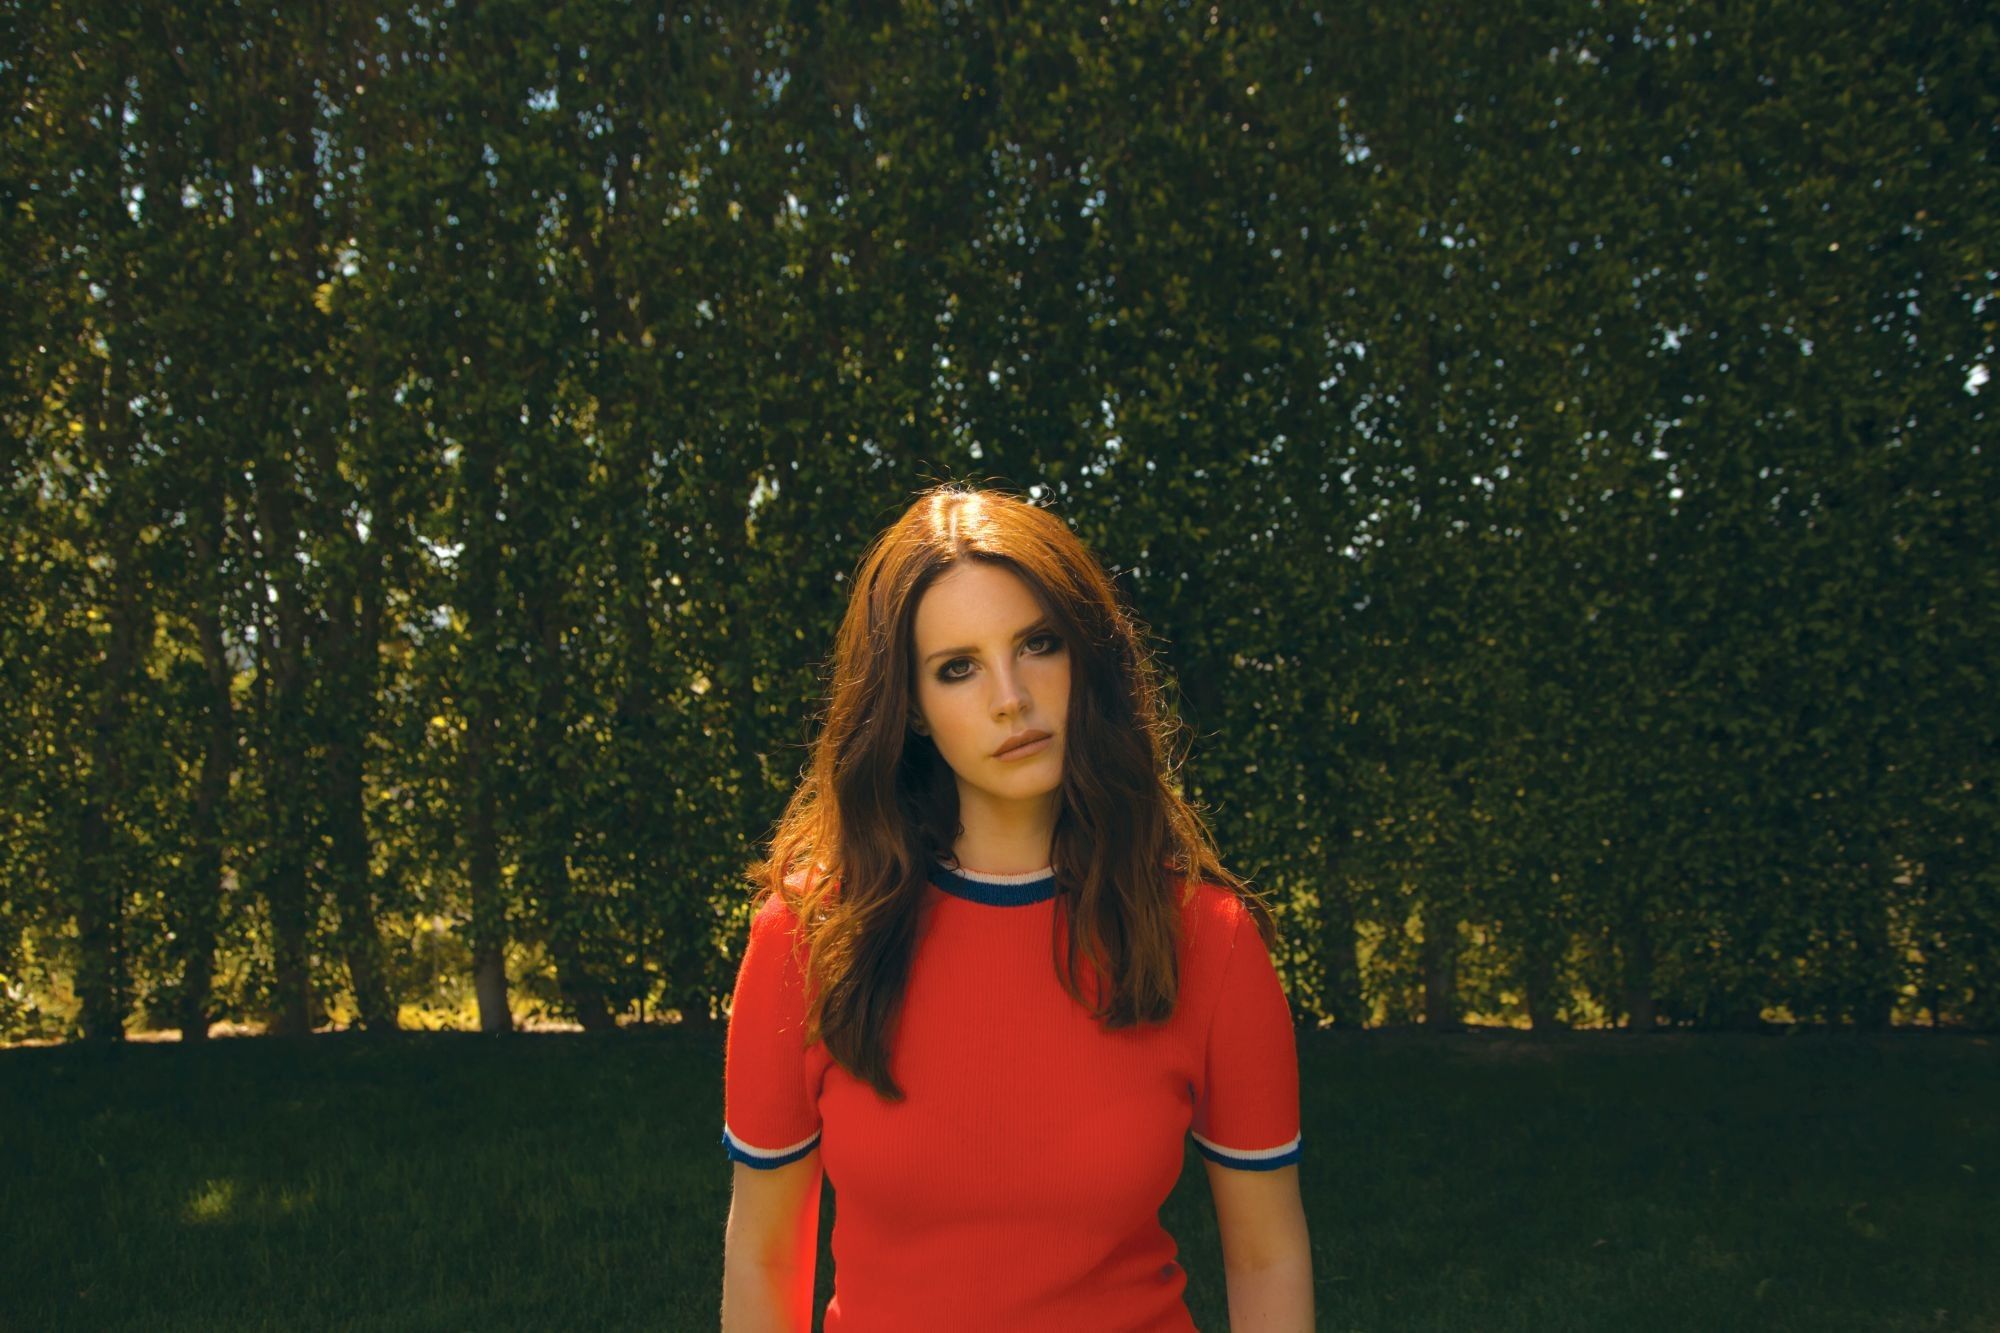 A woman in a red shirt standing in front of a tree. - Lana Del Rey